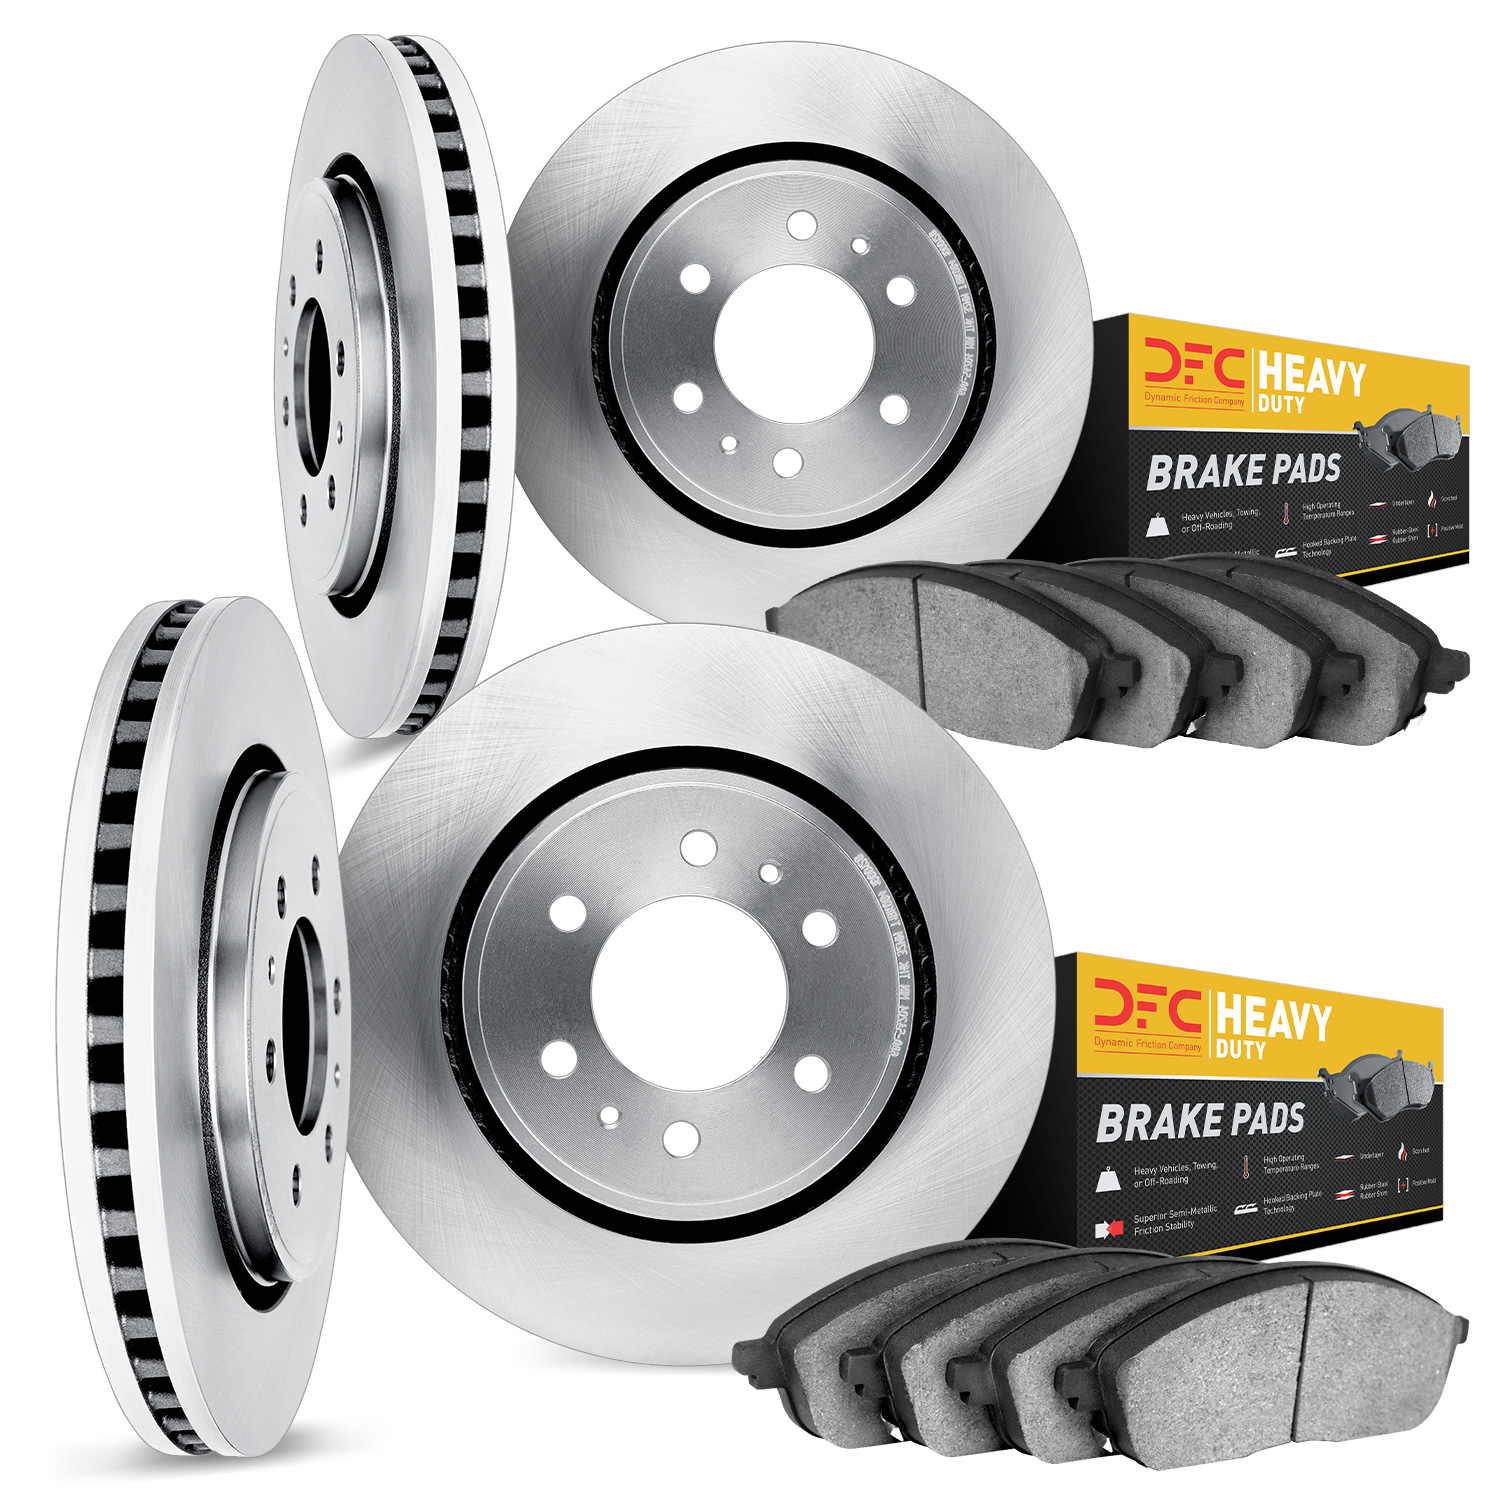 6204-67006 Brake Rotors w/Heavy-Duty Brake Pads Kit, Fits Select Infiniti/Nissan, Position: Front and Rear